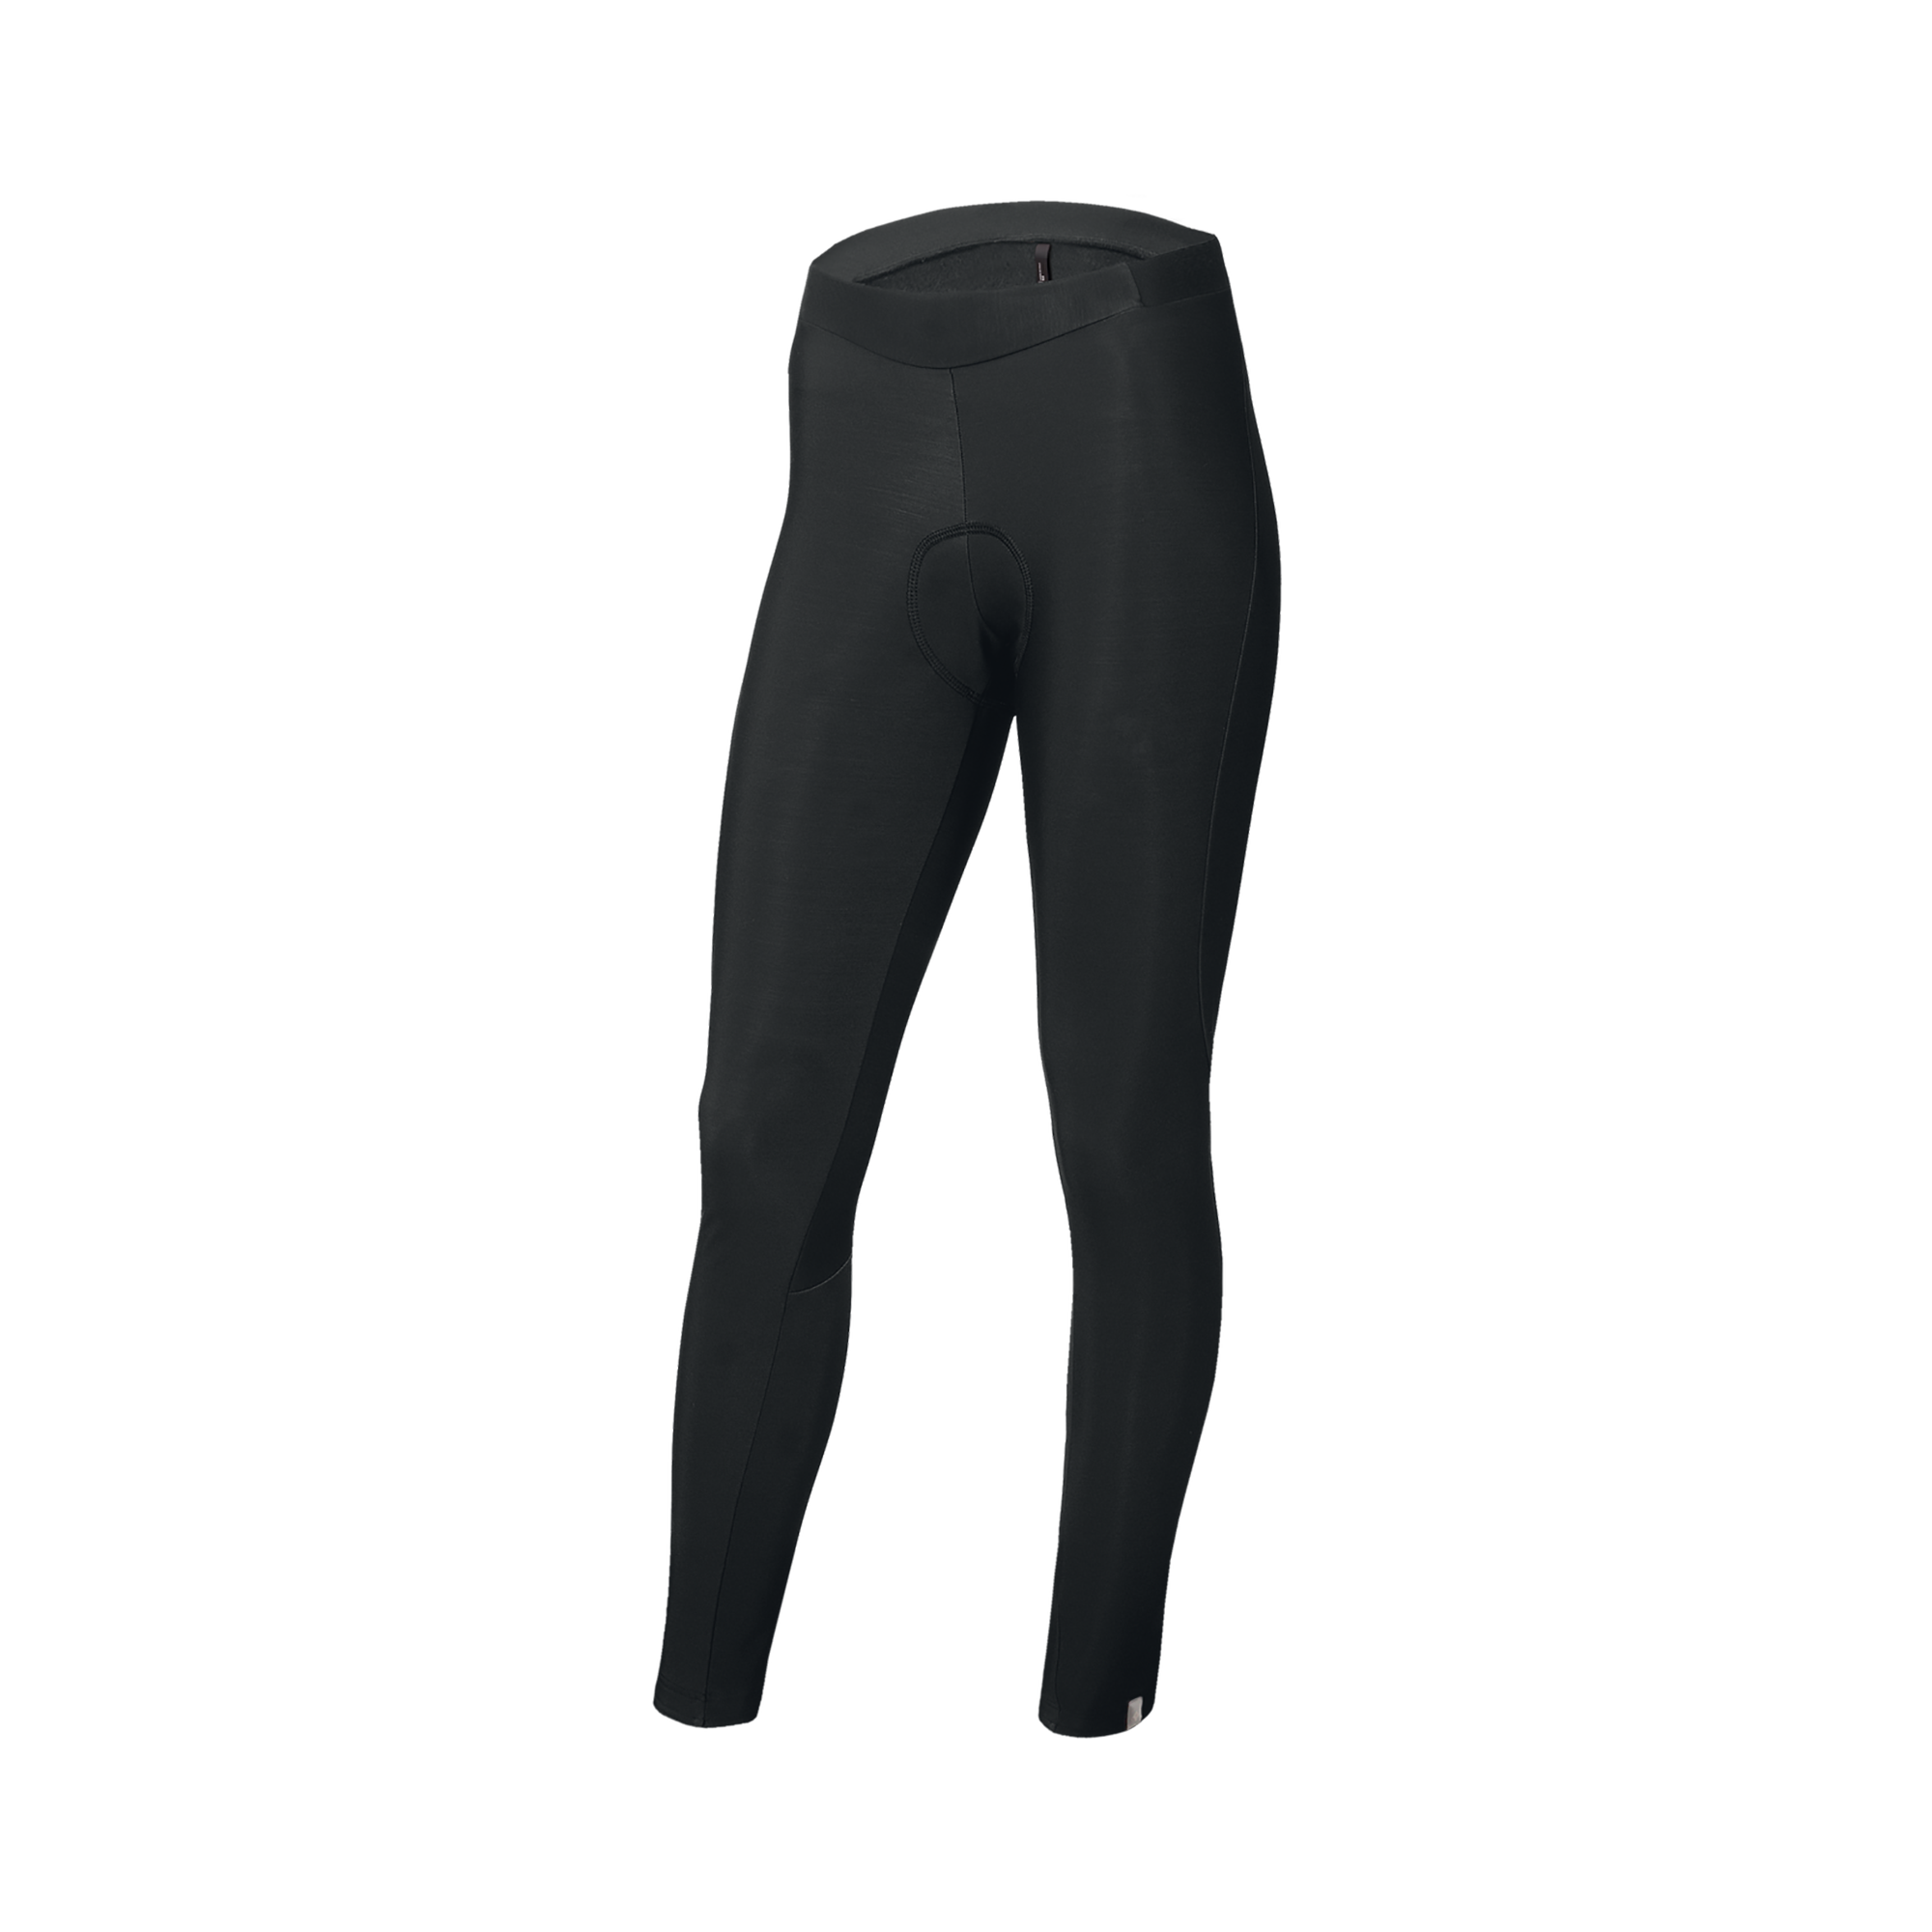 Therminal RBX Sport Women's Cycling Tight